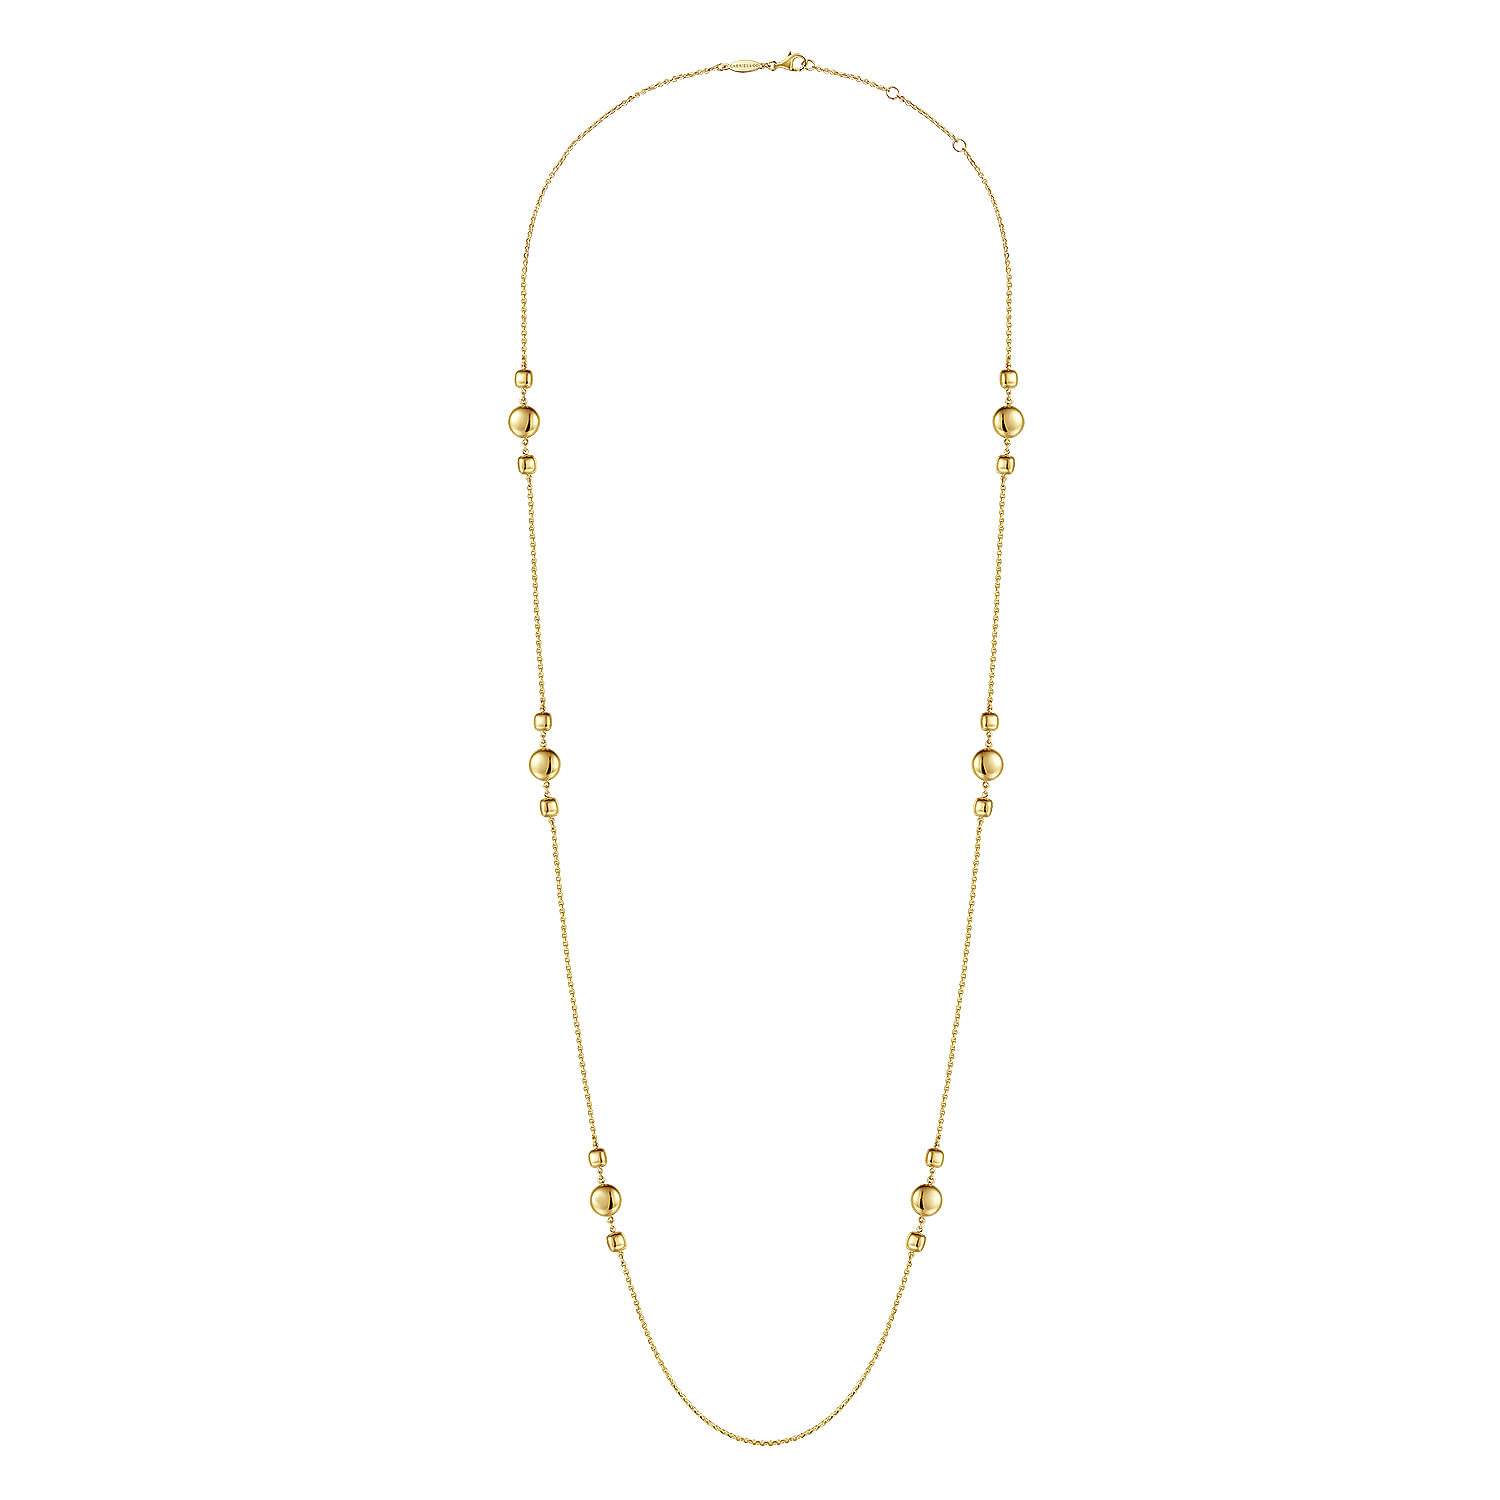 32 inch 14K Yellow Gold Station Necklace